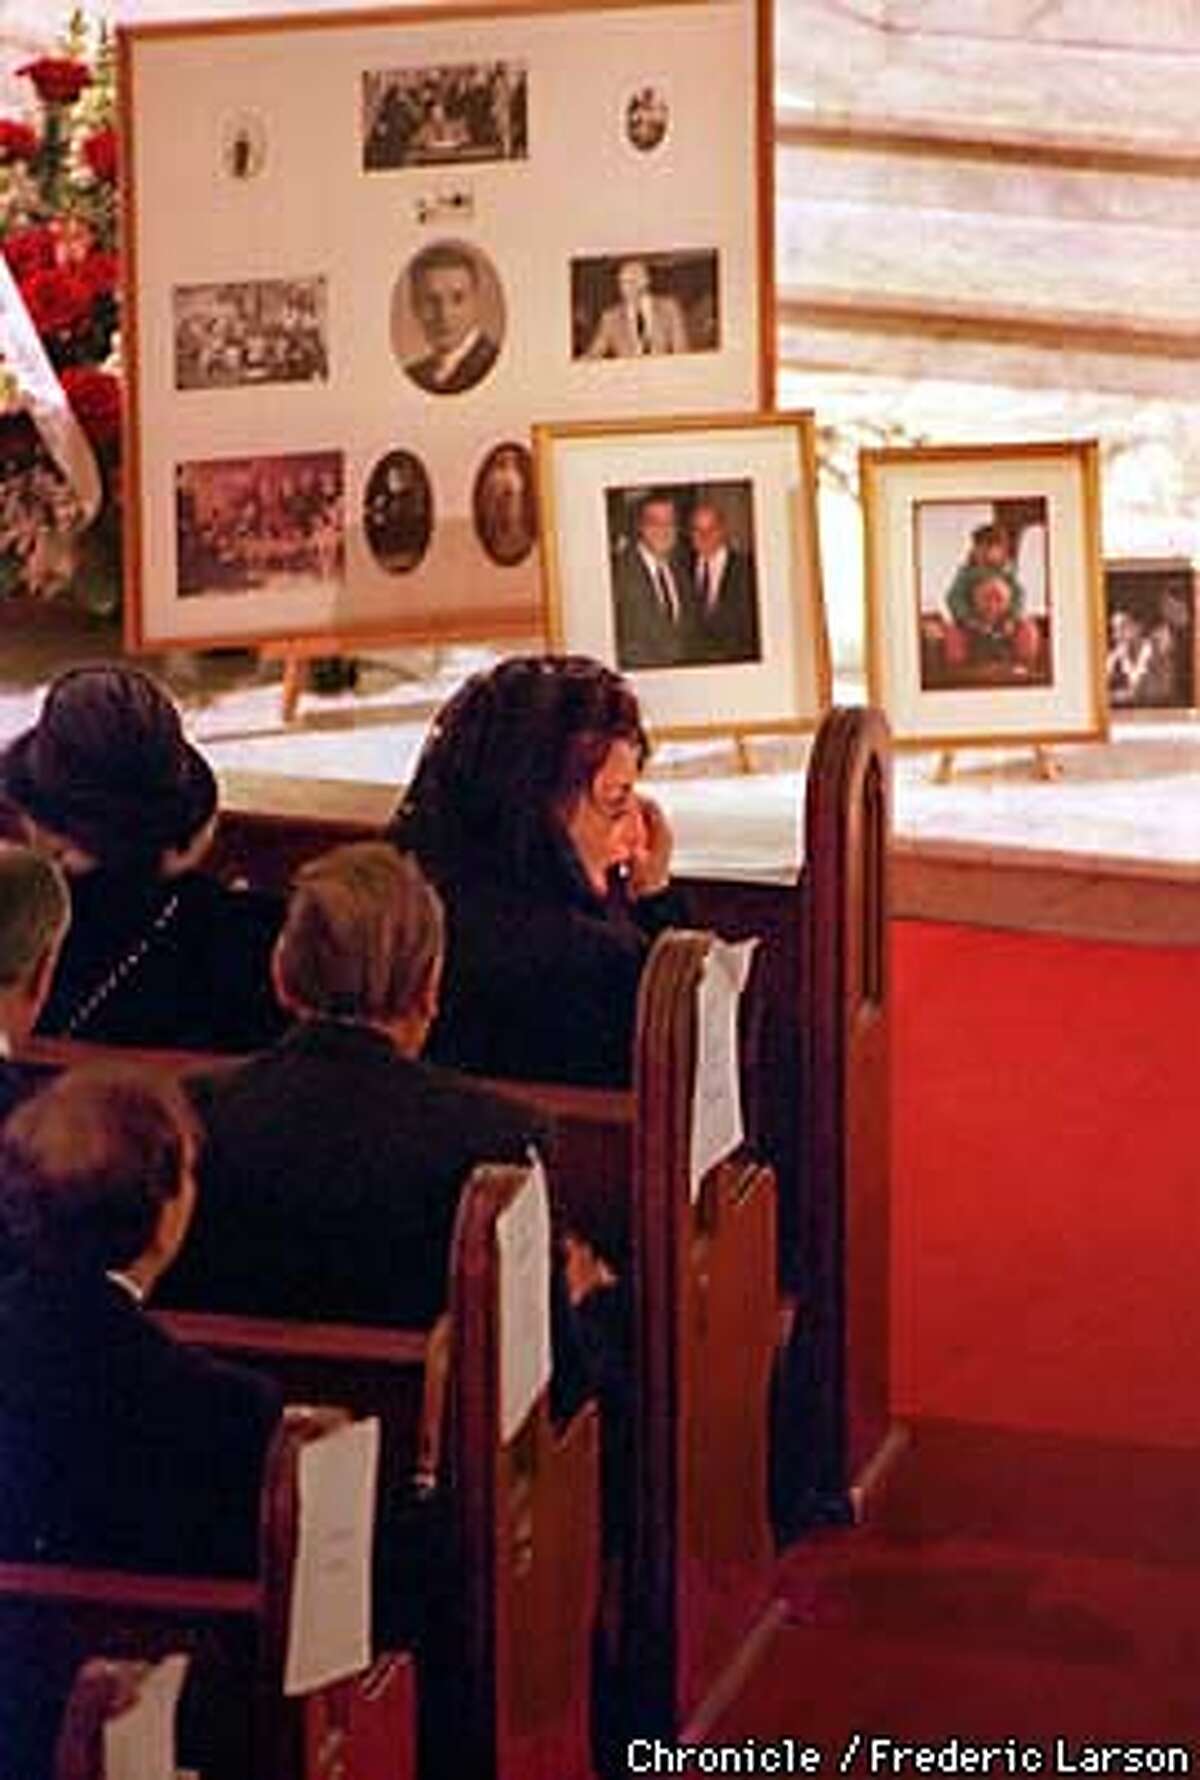 ALIOTO ANGELA/C/MN/FRL: Surrounded by family photograph during Joseph Alioto funeral, Joe daughter, Angela drys a tear from her face. Chronicle photo by Frederic Larson.